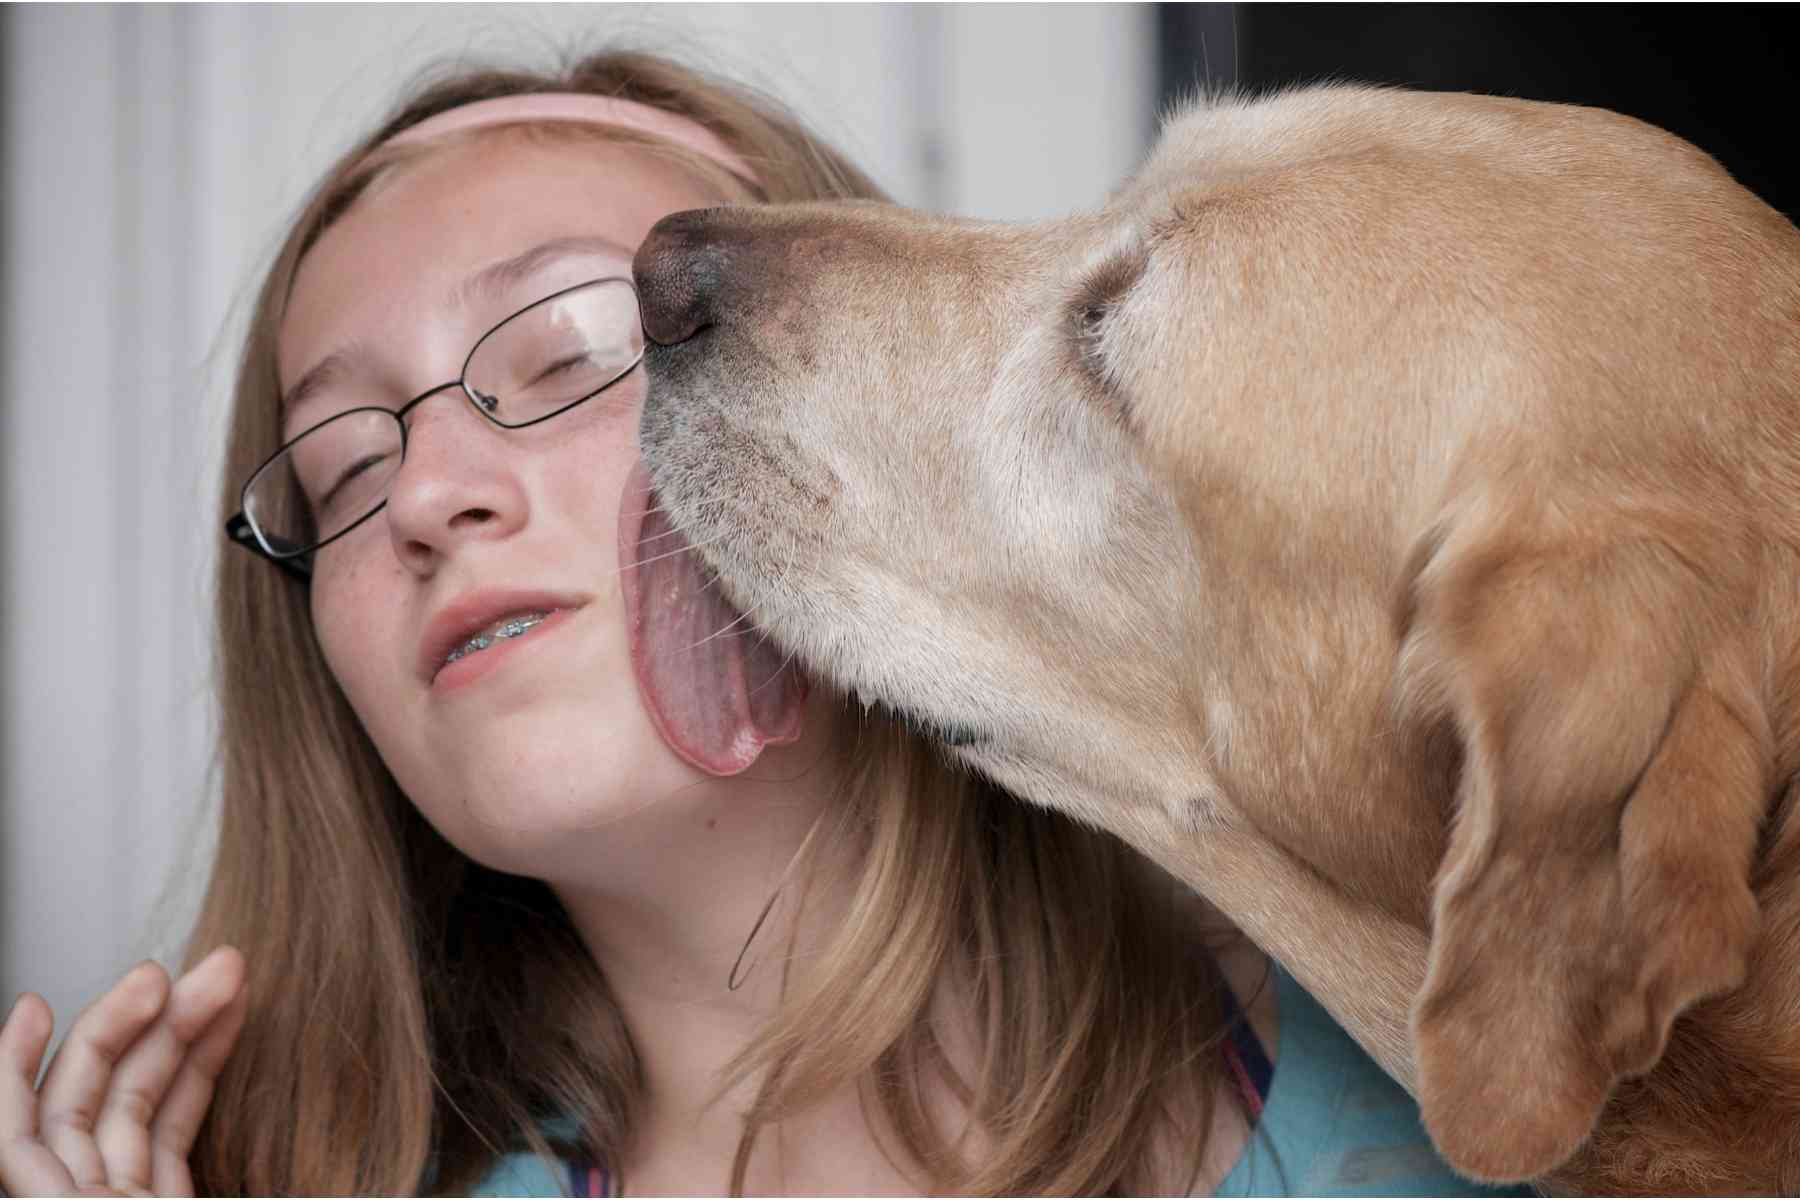 Golden Retriever dog licking the face of a sad girl in glasses